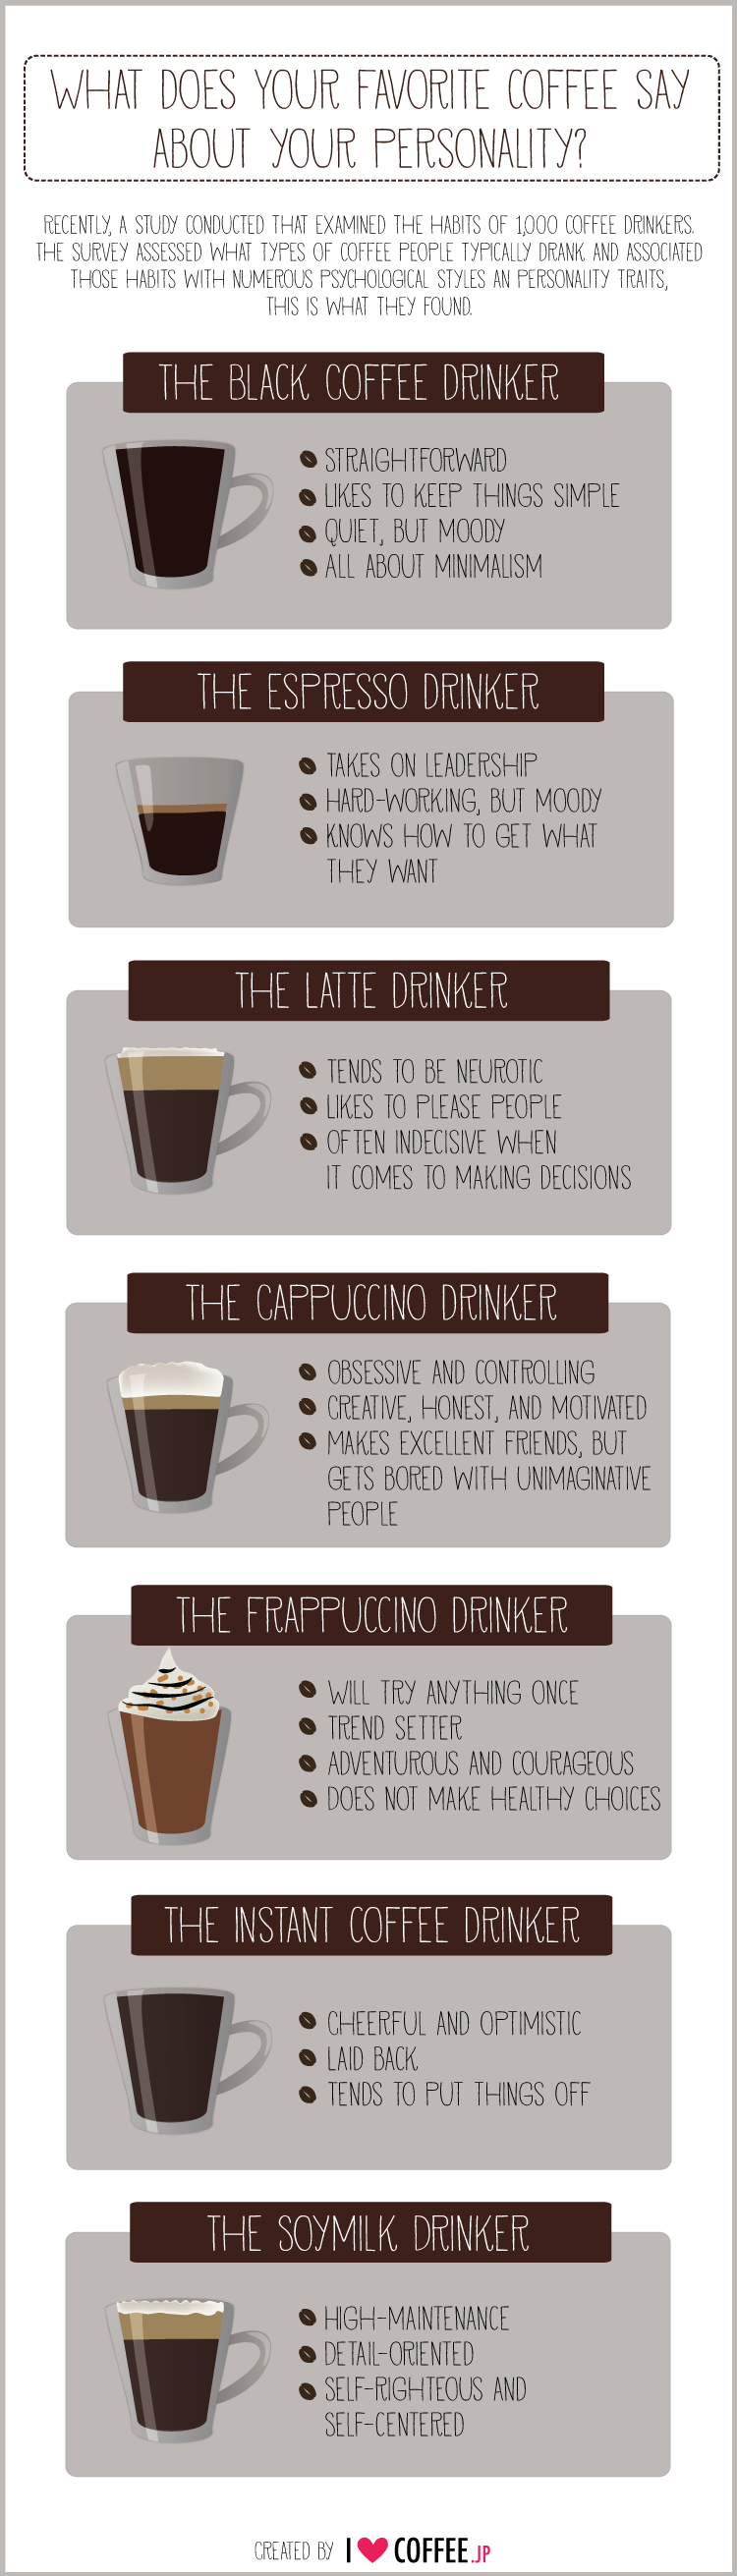 coffee_personality